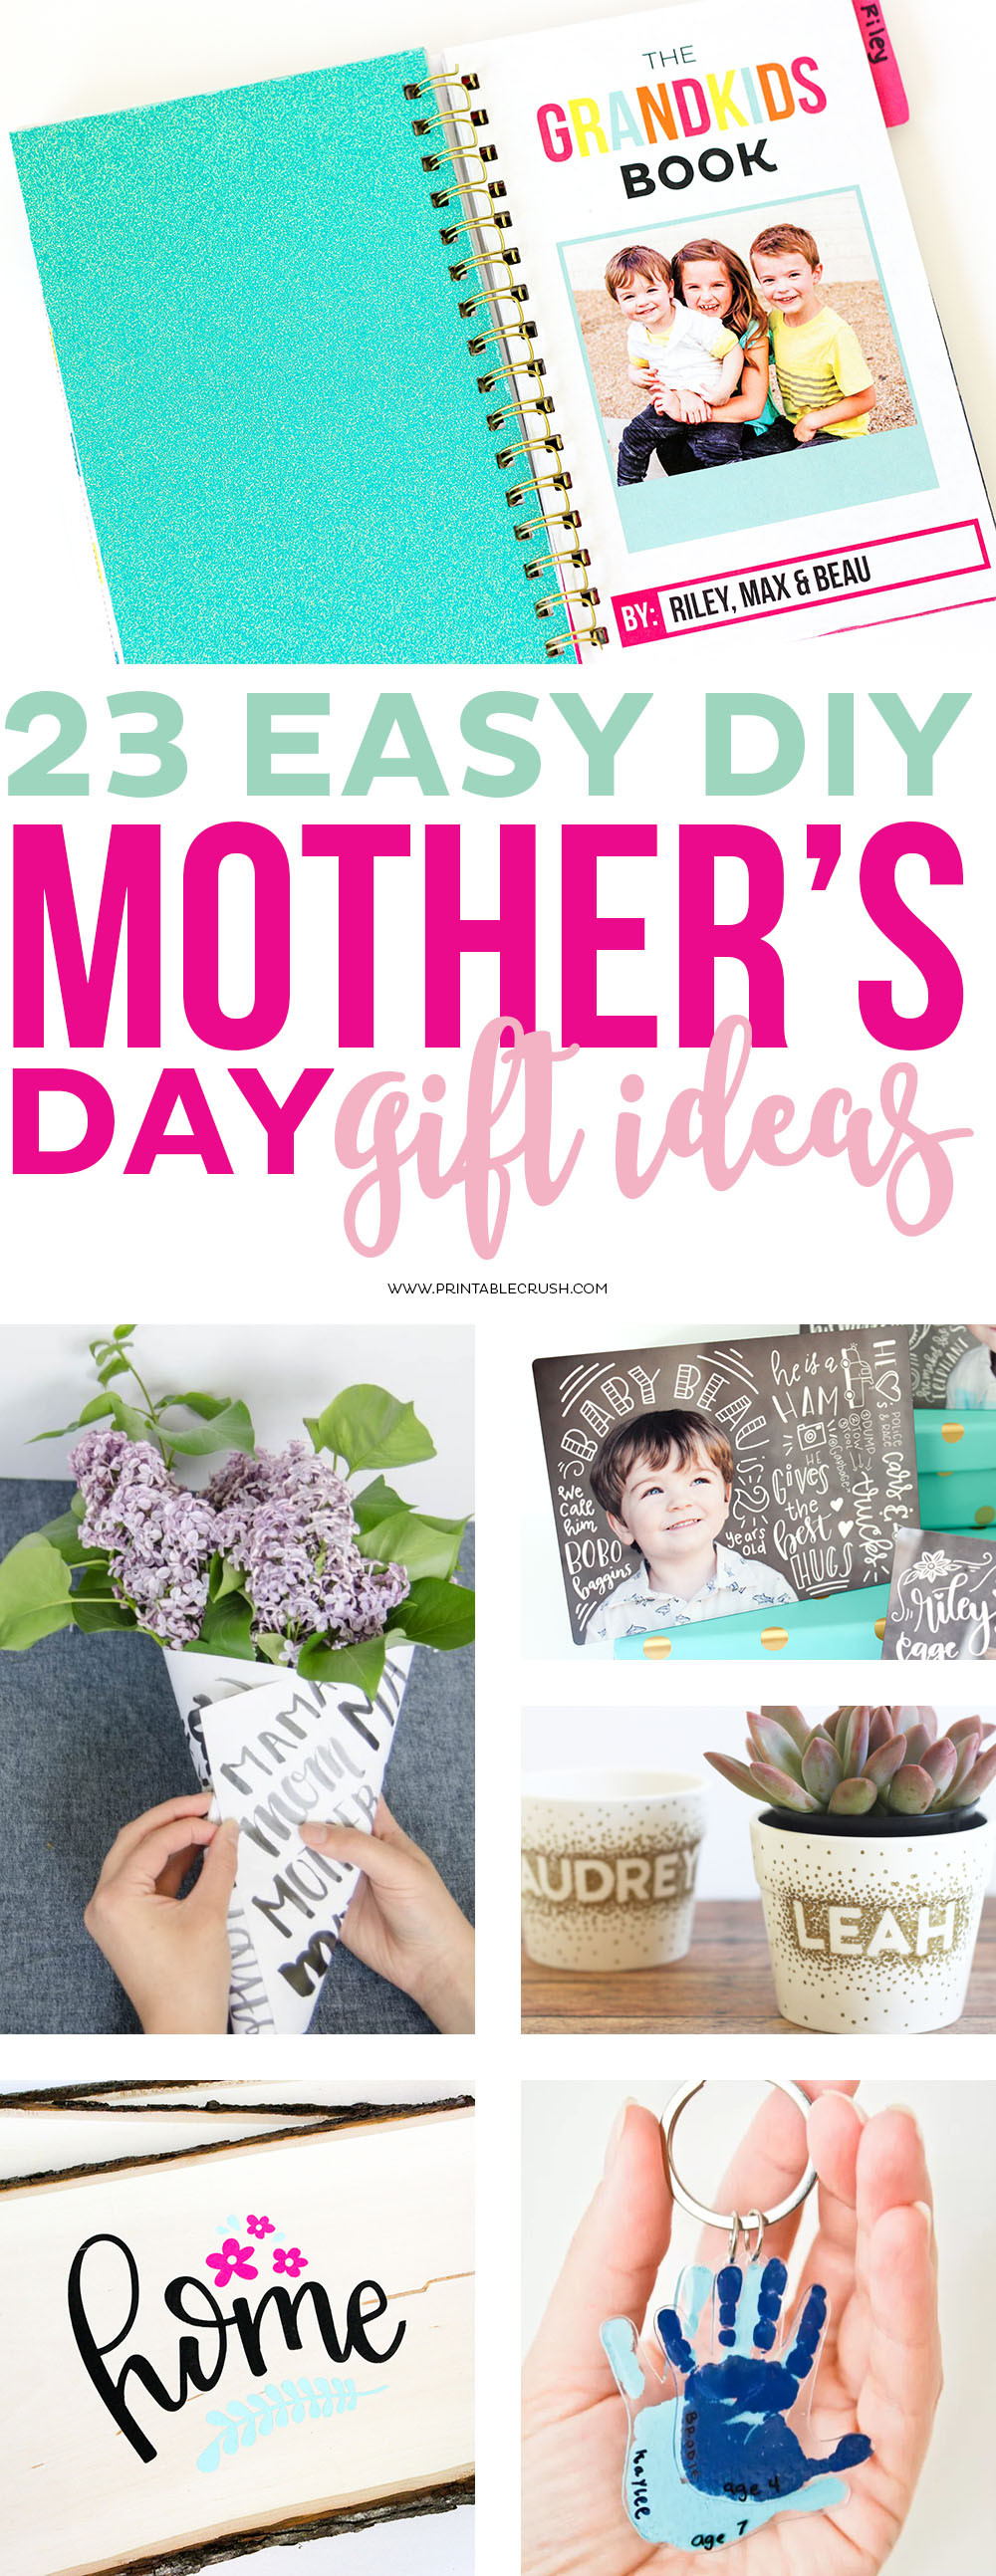 Easy DIY Gifts For Mom
 23 Easy DIY Mother s Day Gift Ideas Printable Crush